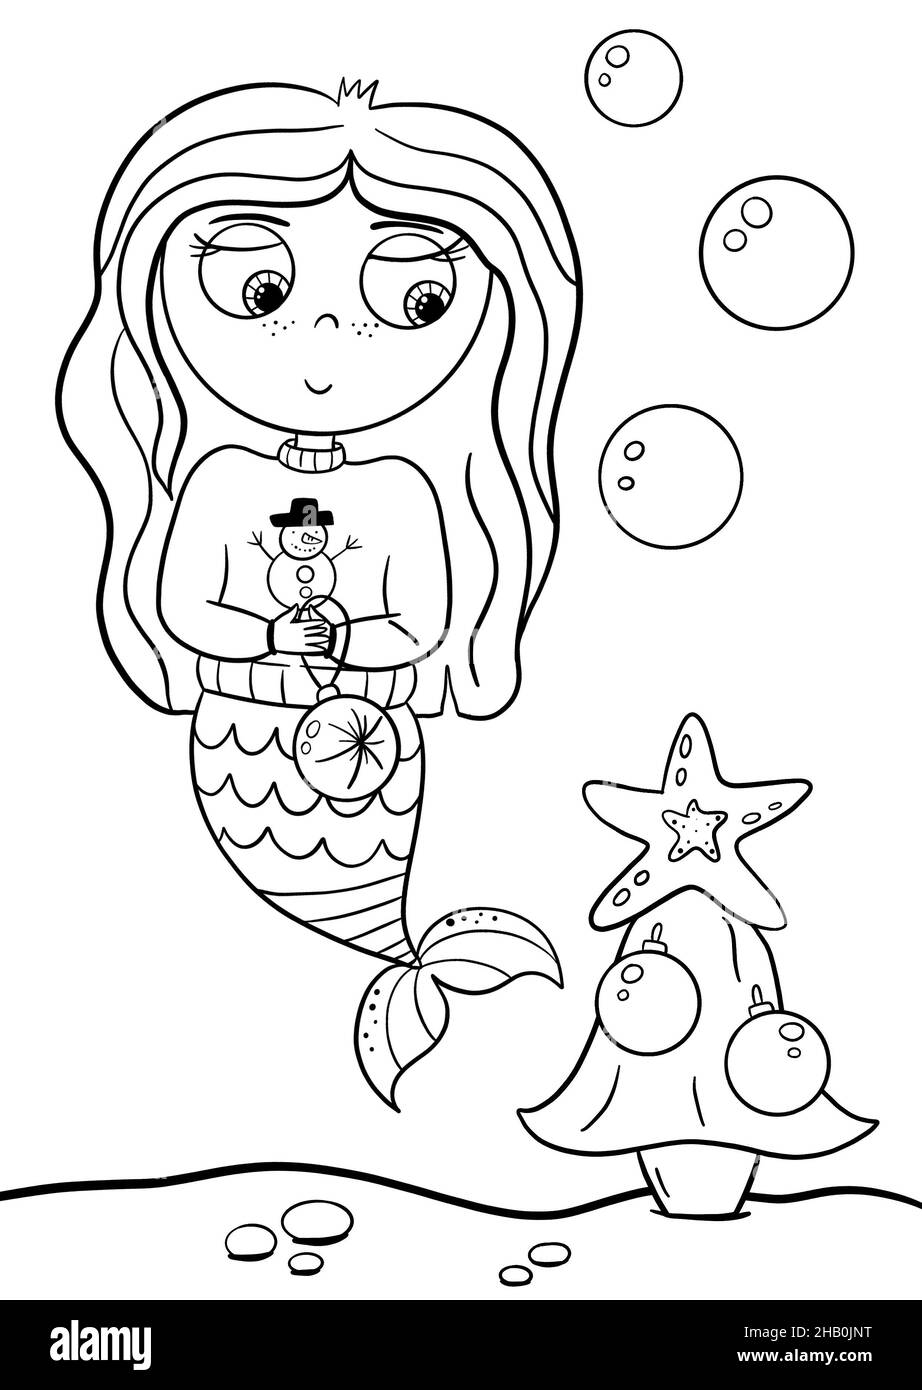 ute little mermaid celebrate Christmas, Coloring book page for kids. Collection of design element, outline, kawaii anime chibi style Stock Photo